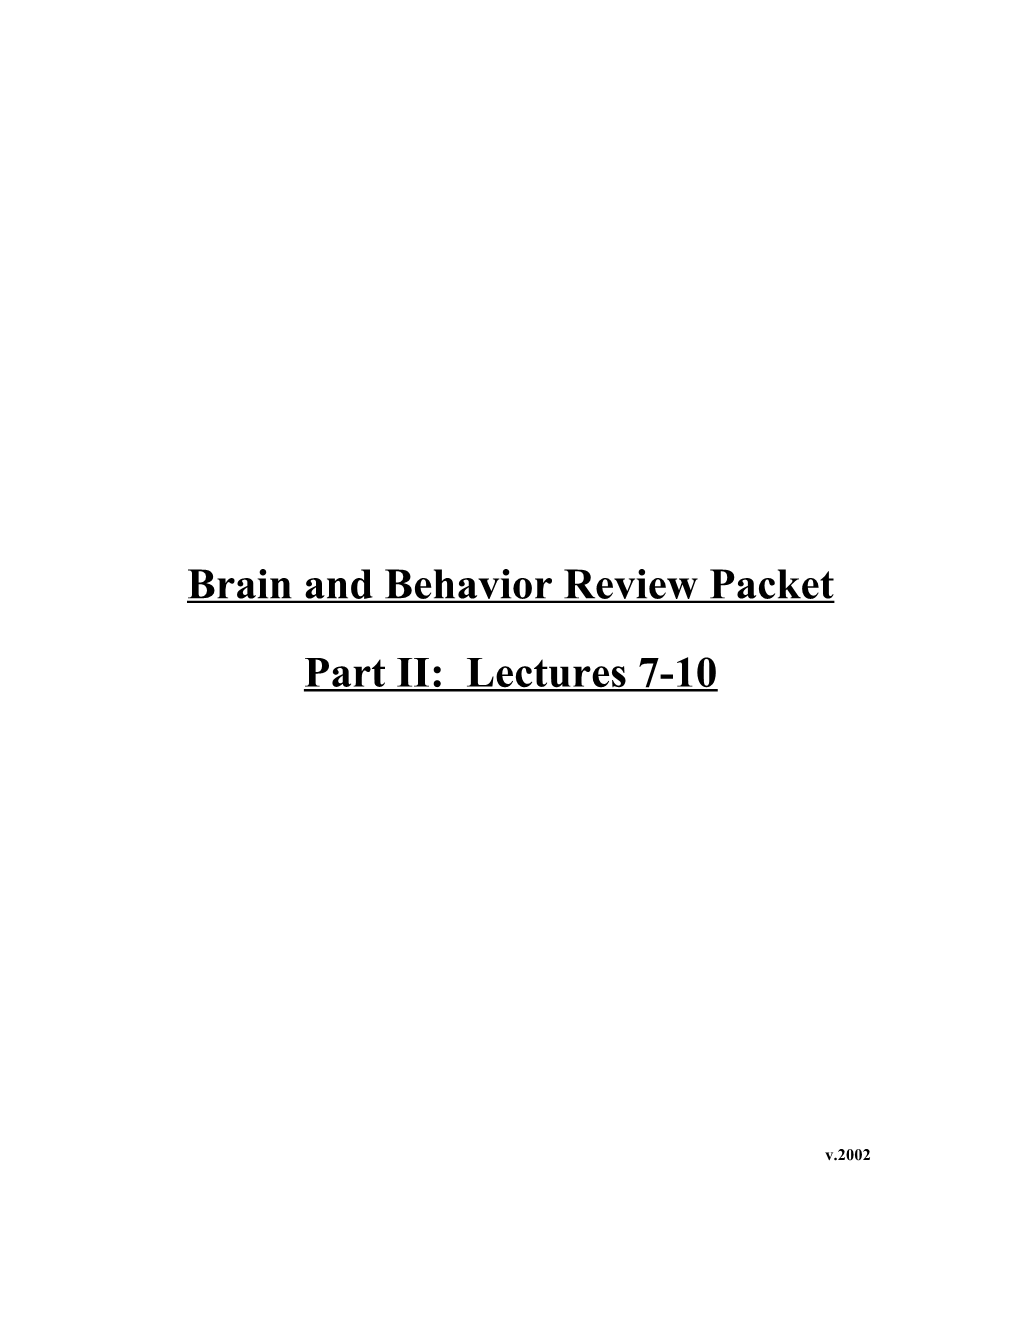 Brain and Behavior Review Packet